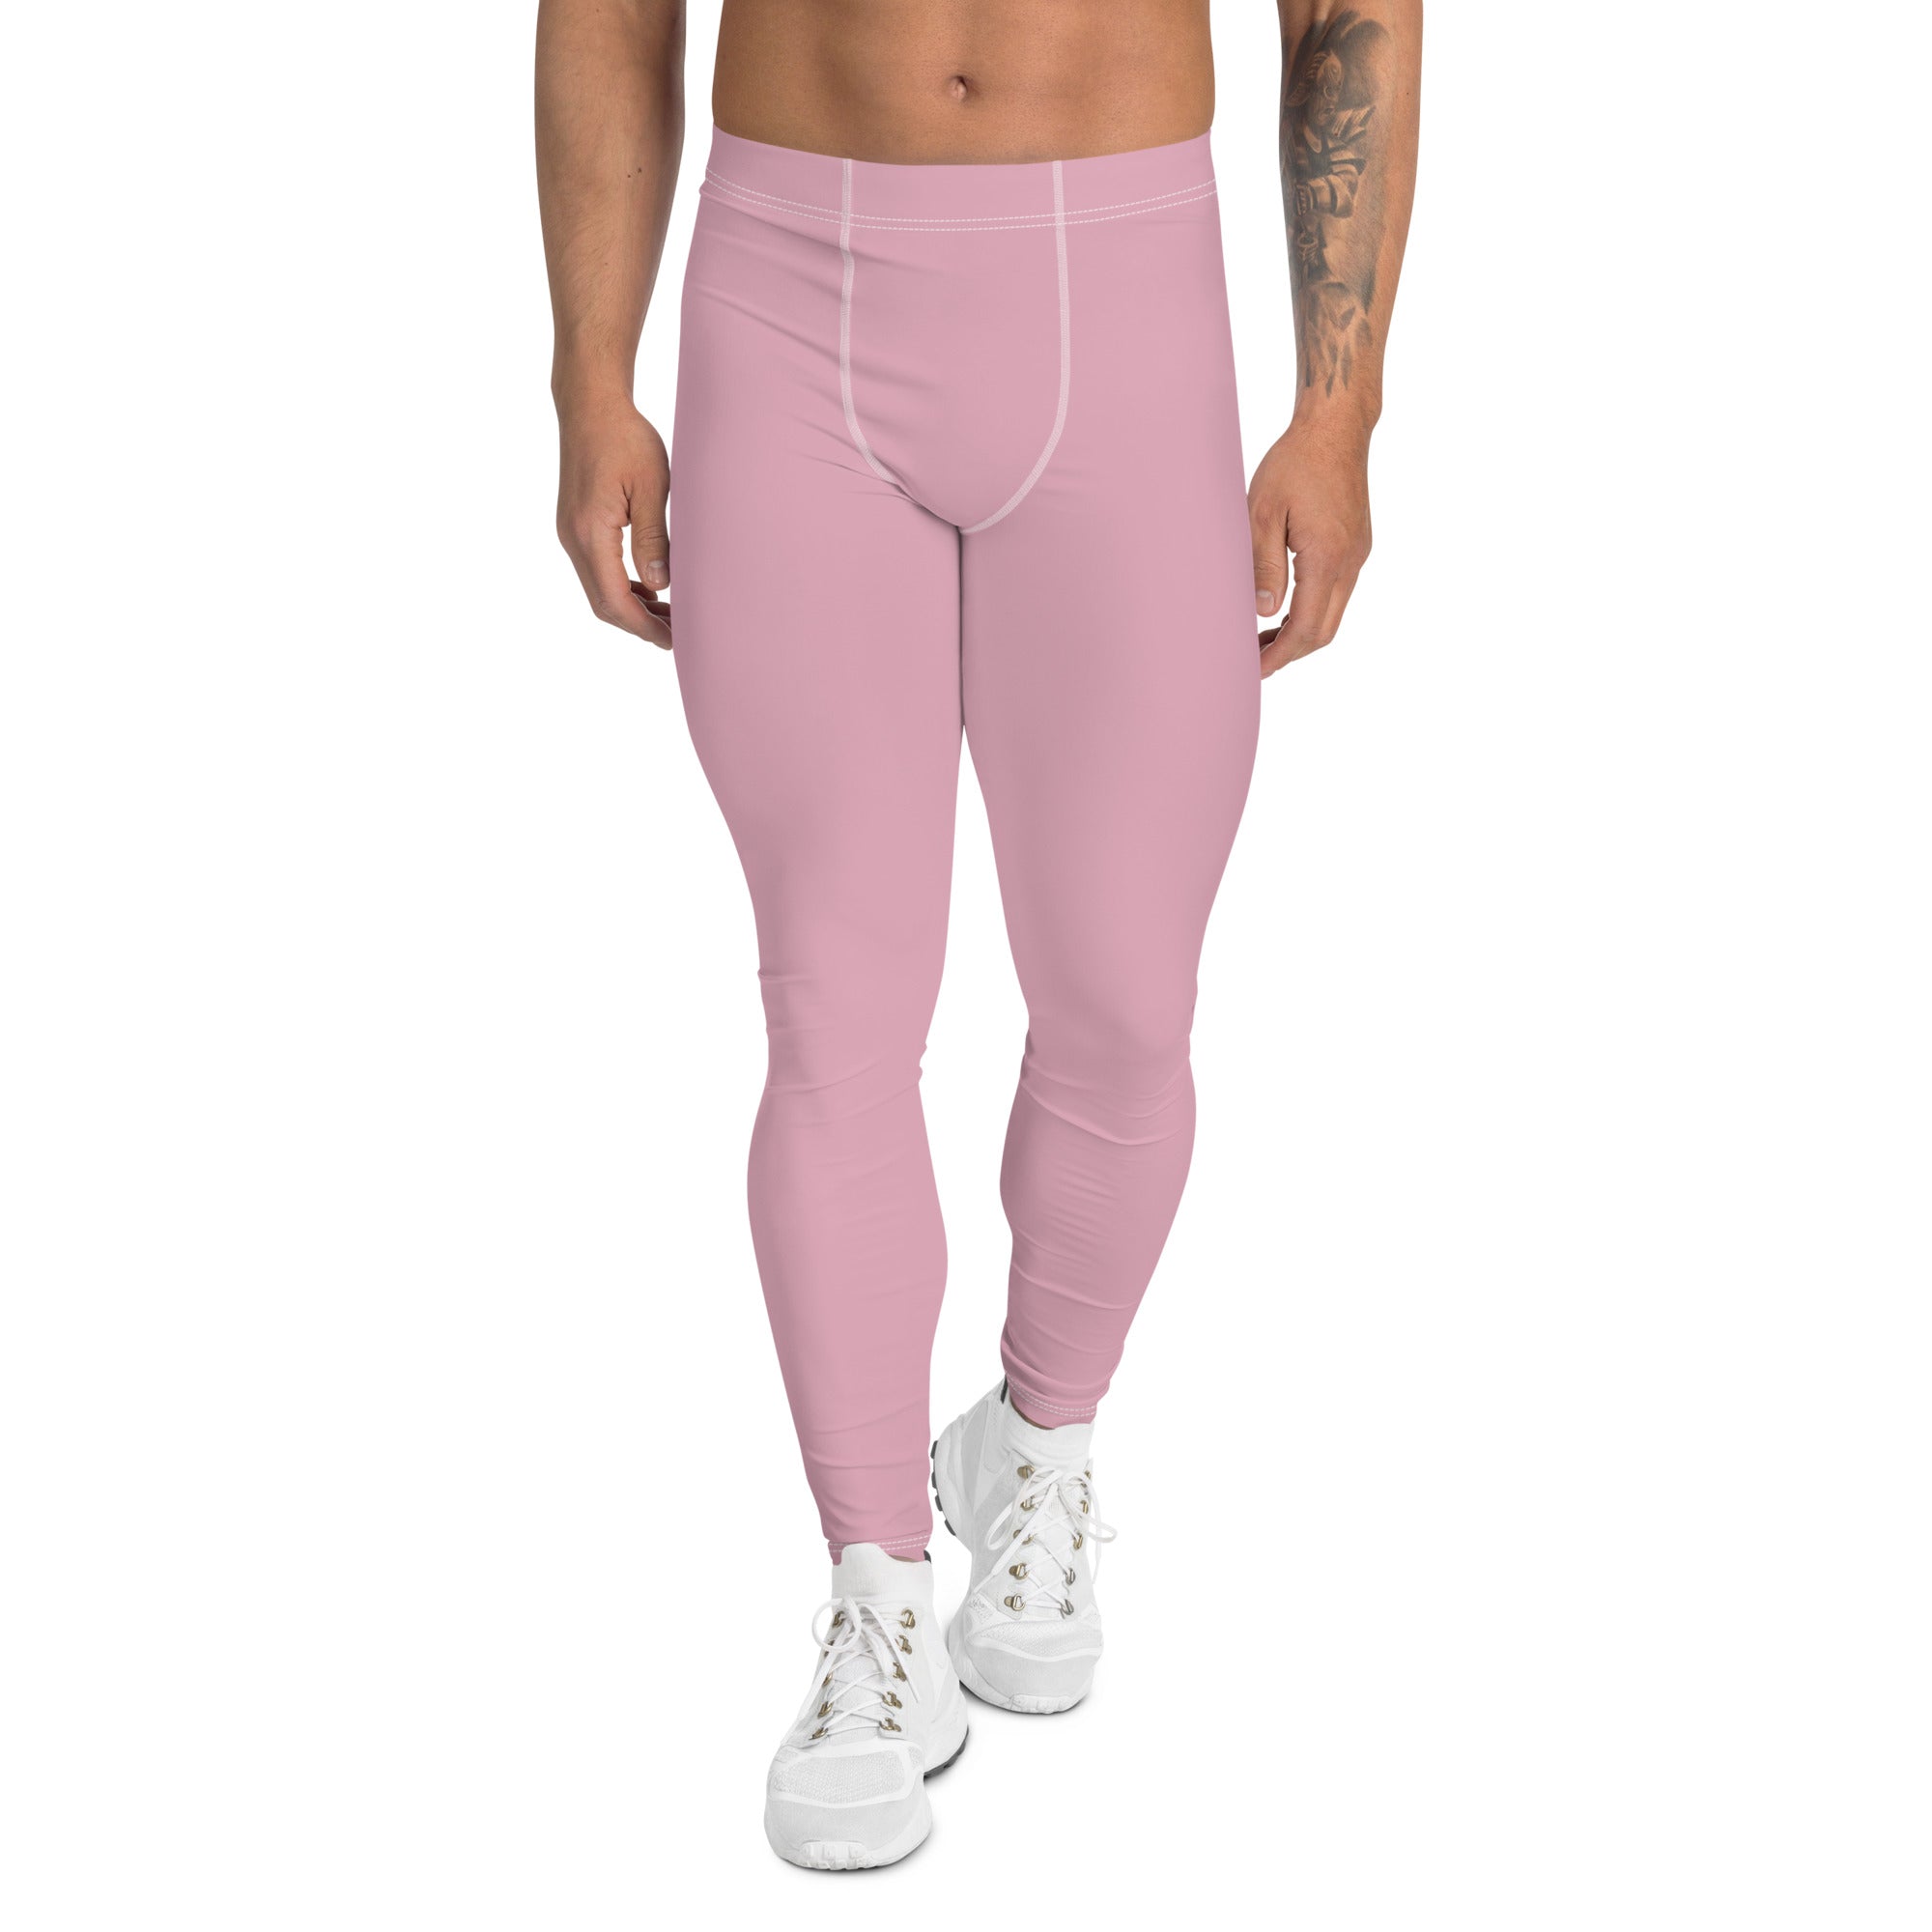 Pale Pink Nude Meggings, Solid Pink Color Print Premium Classic Elastic Comfy Men's Leggings Fitted Tights Pants - Made in USA/MX/EU (US Size: XS-3XL) Spandex Meggings Men's Workout Gym Tights Leggings, Compression Tights, Kinky Fetish Men Pants